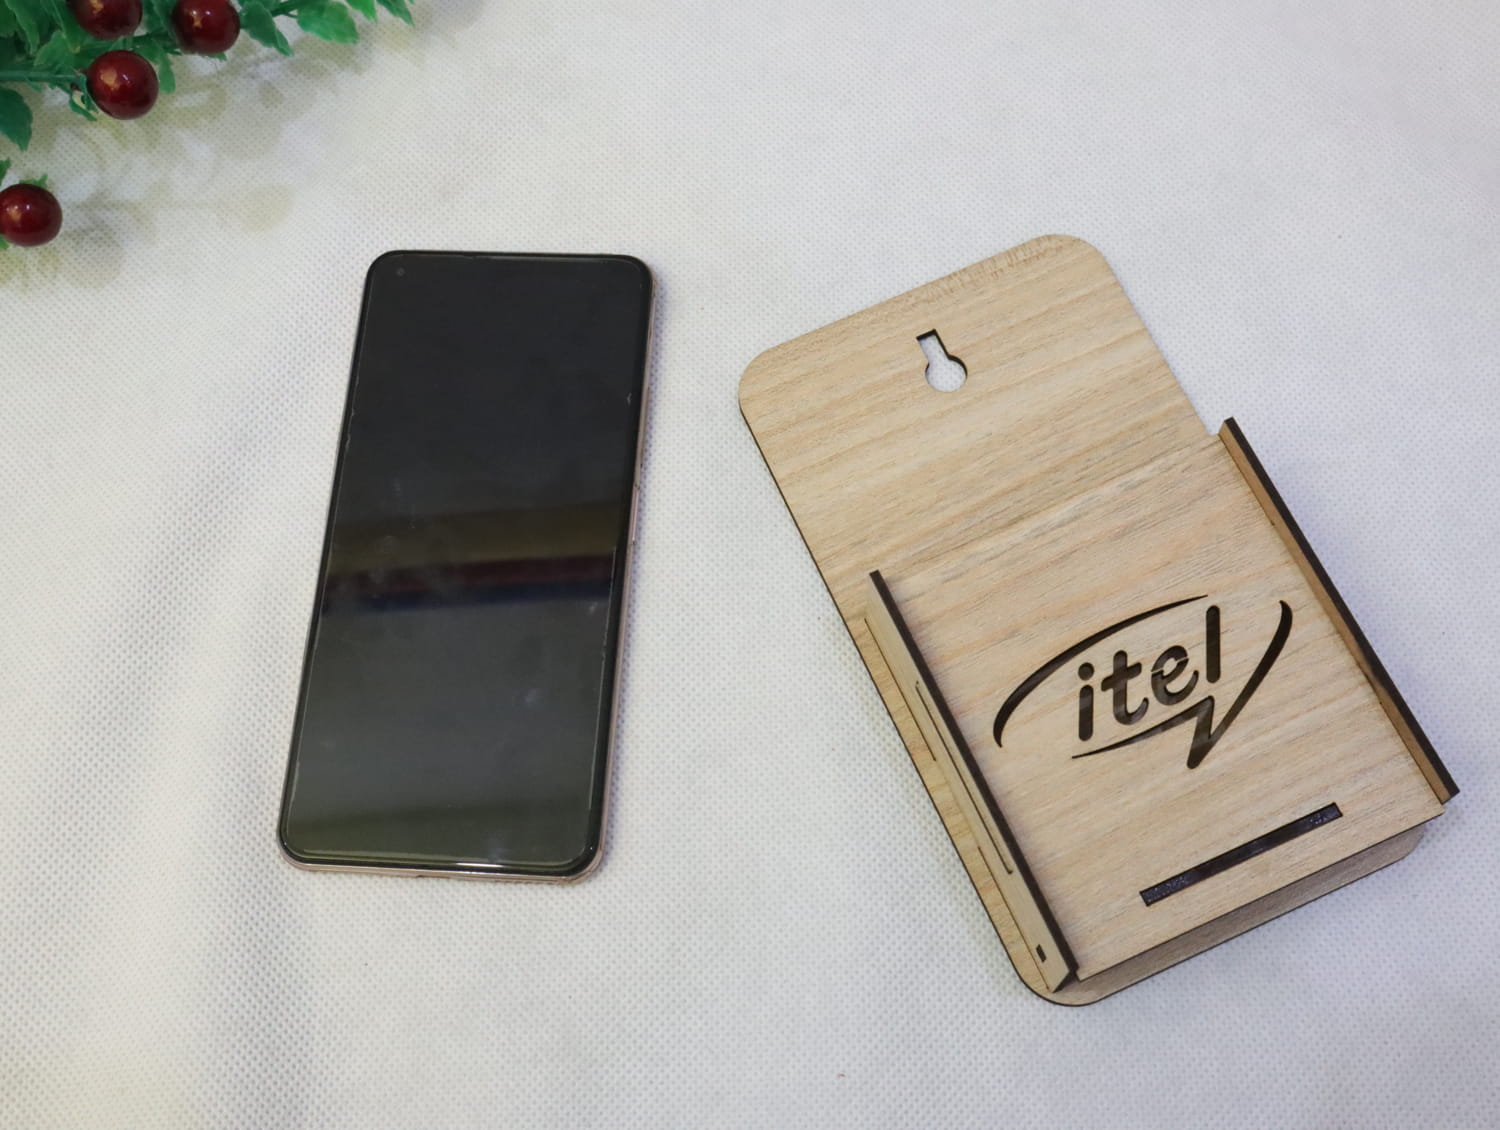 Laser Cut Wall Mounted Mobile Holder With Itel Logo Free Vector